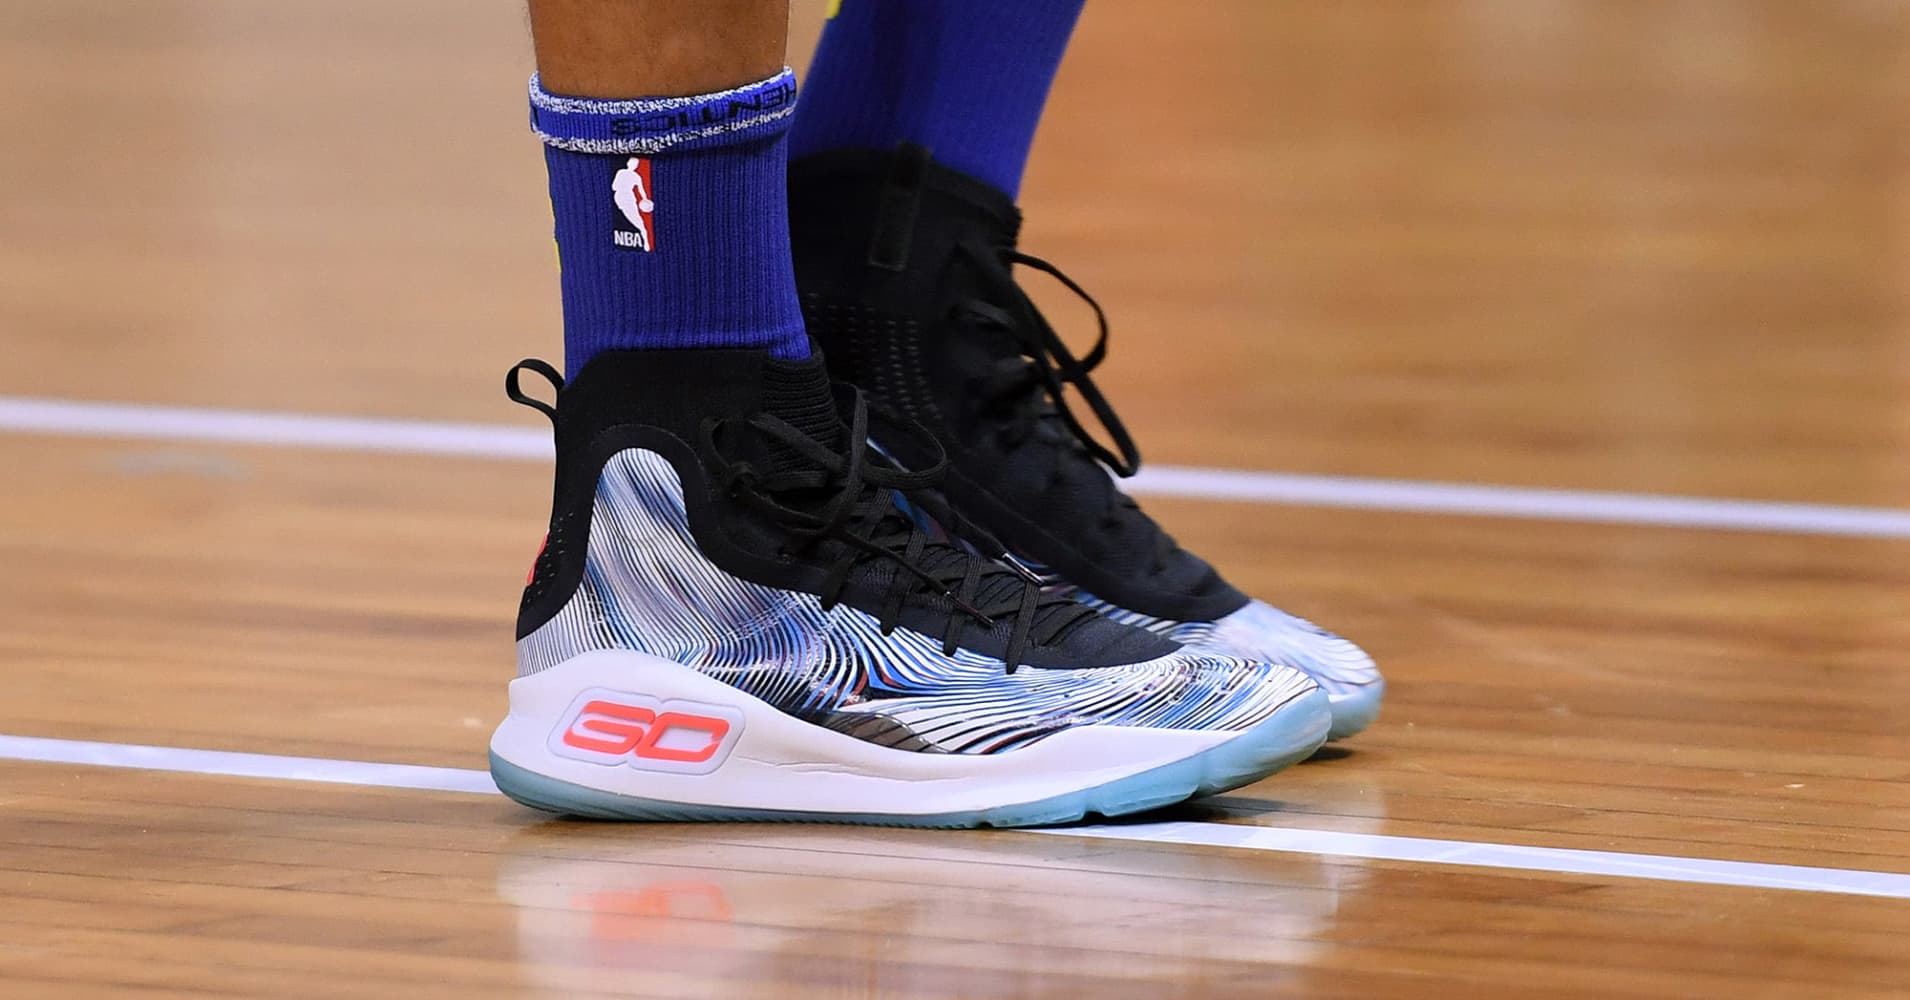 Stephen Curry’s new shoe will spark an Under Armour turnaround Analyst